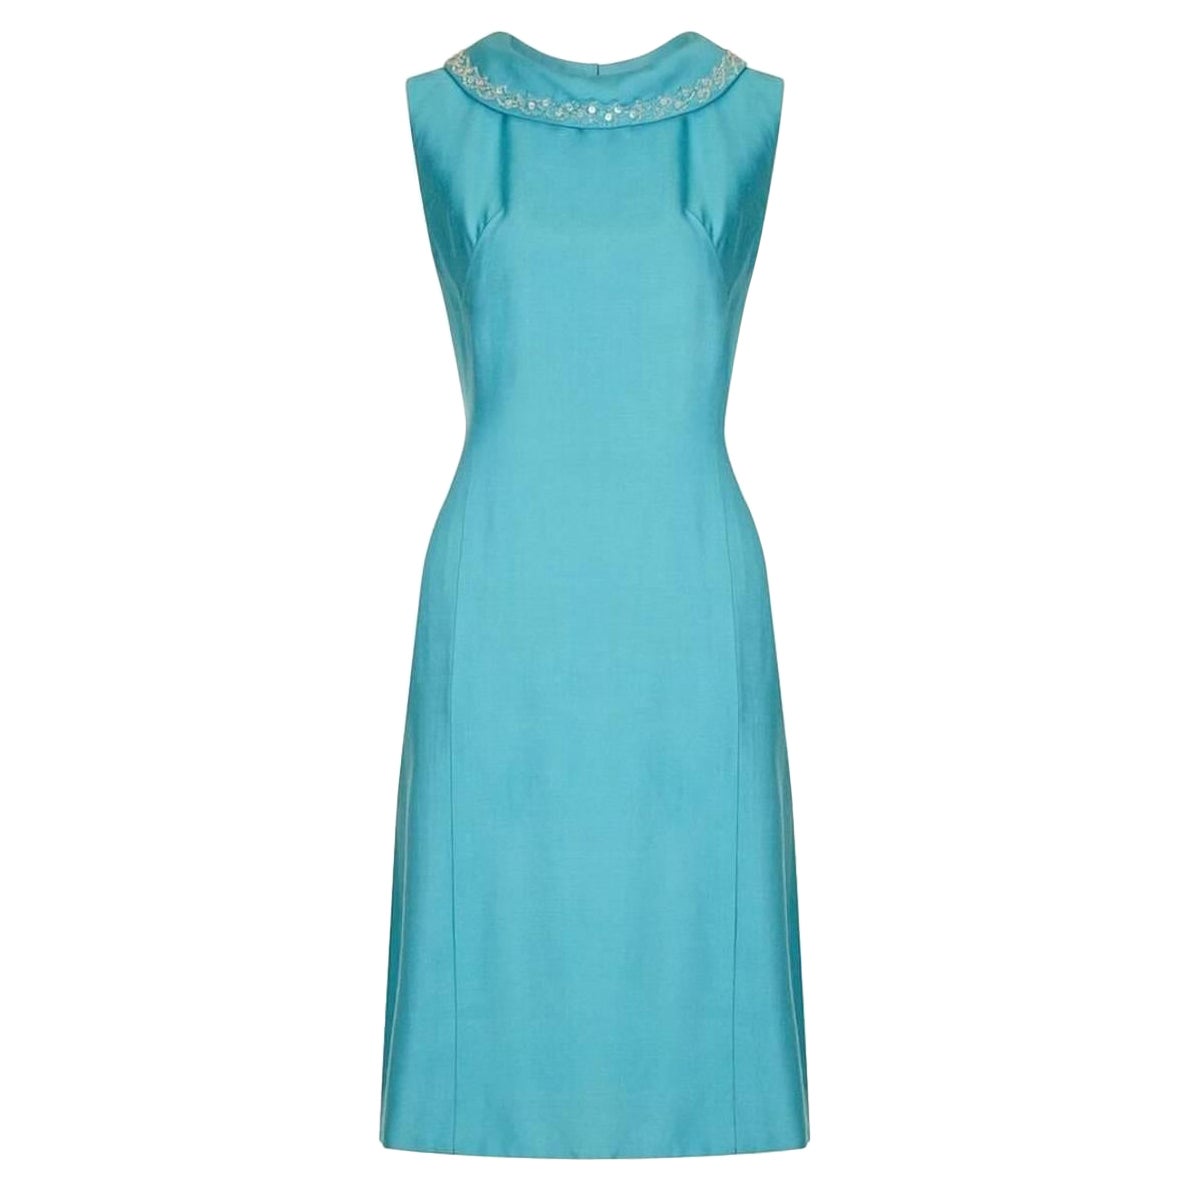 1960s Turquoise Linen Mod Dress With Beaded Collar